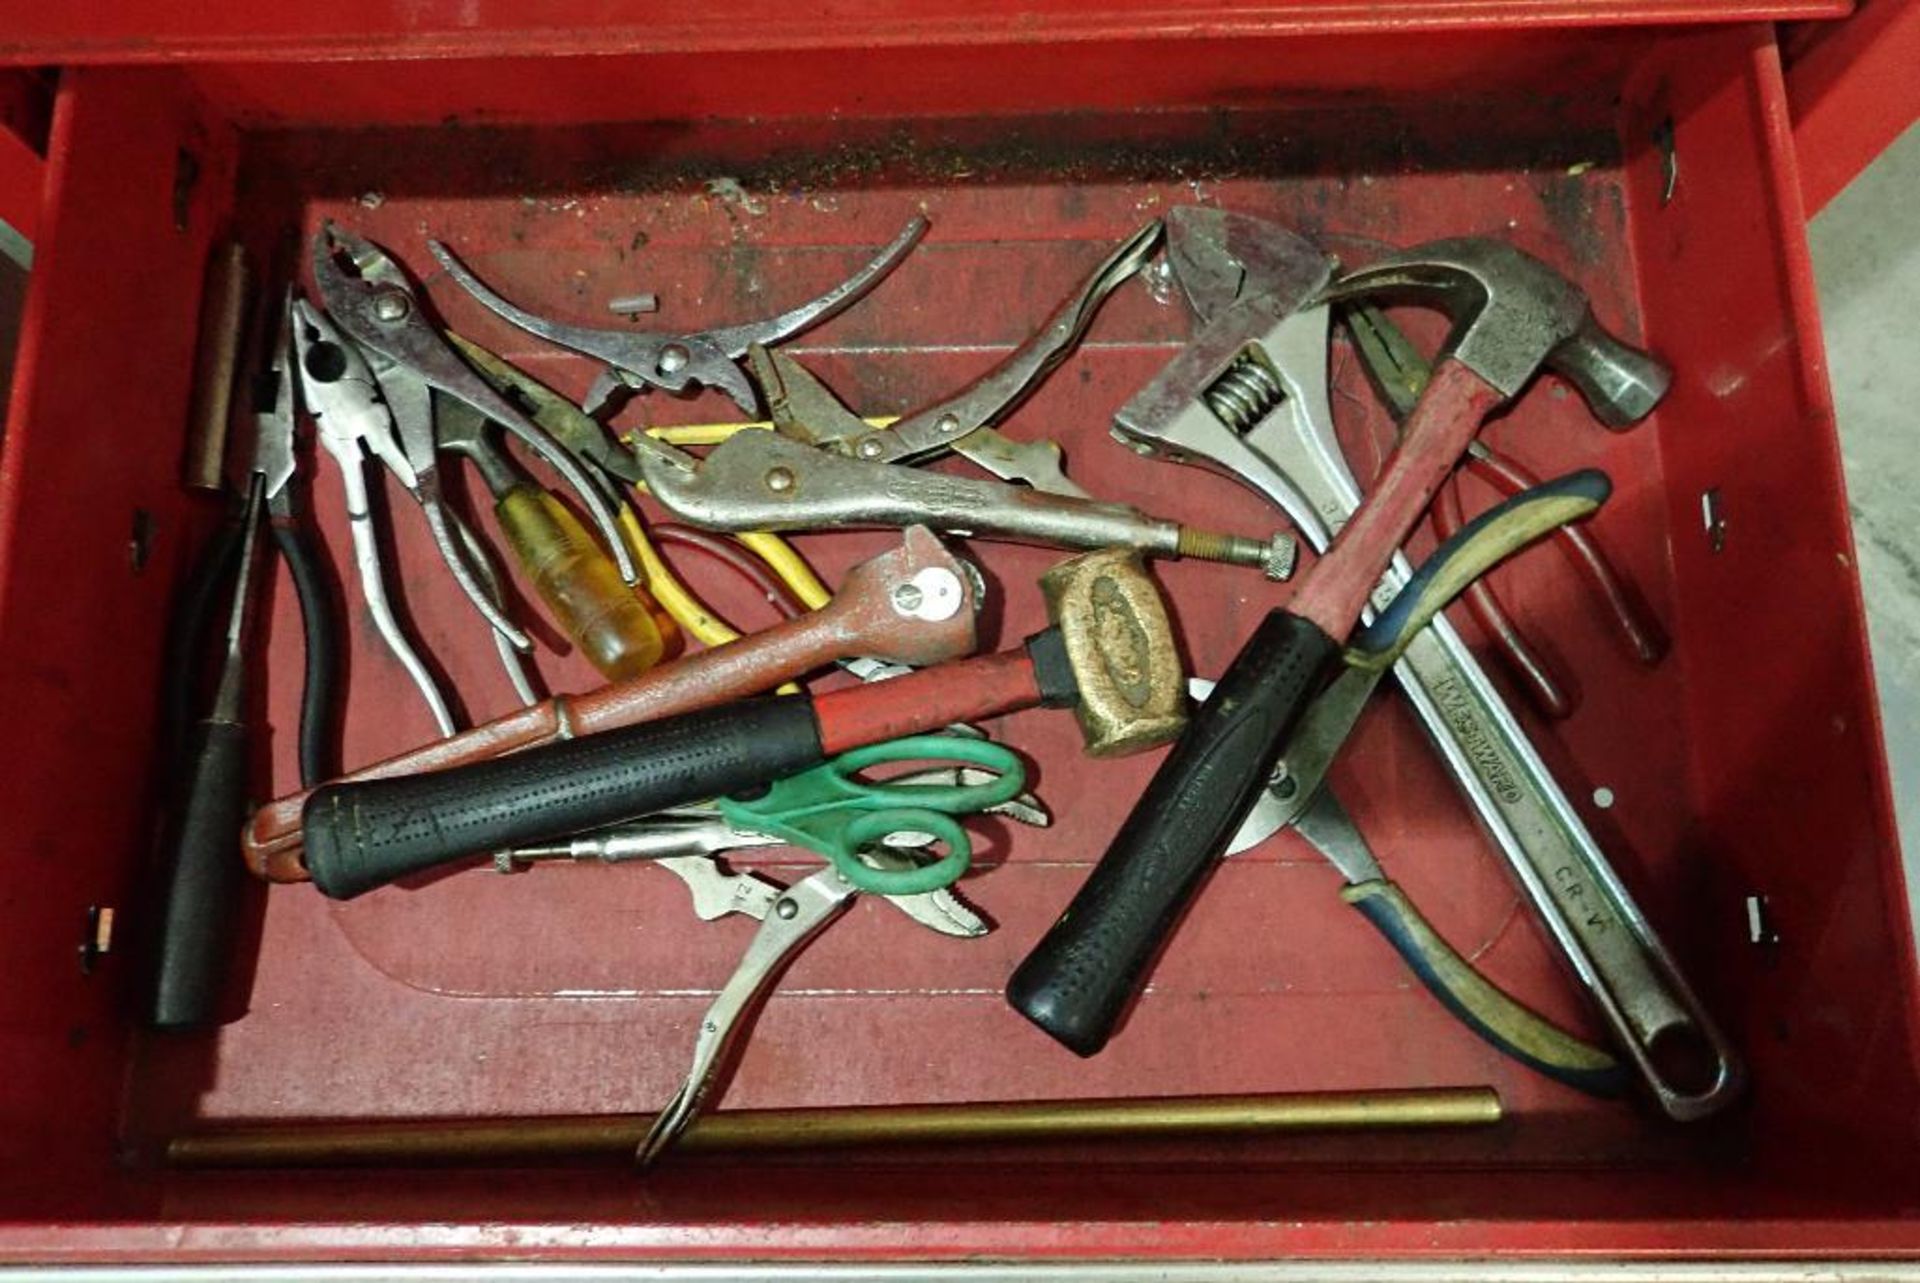 (2) tool chests with contents, wrenches, sockets, drill bits screw drivers, air tools, hammers, plie - Image 12 of 31